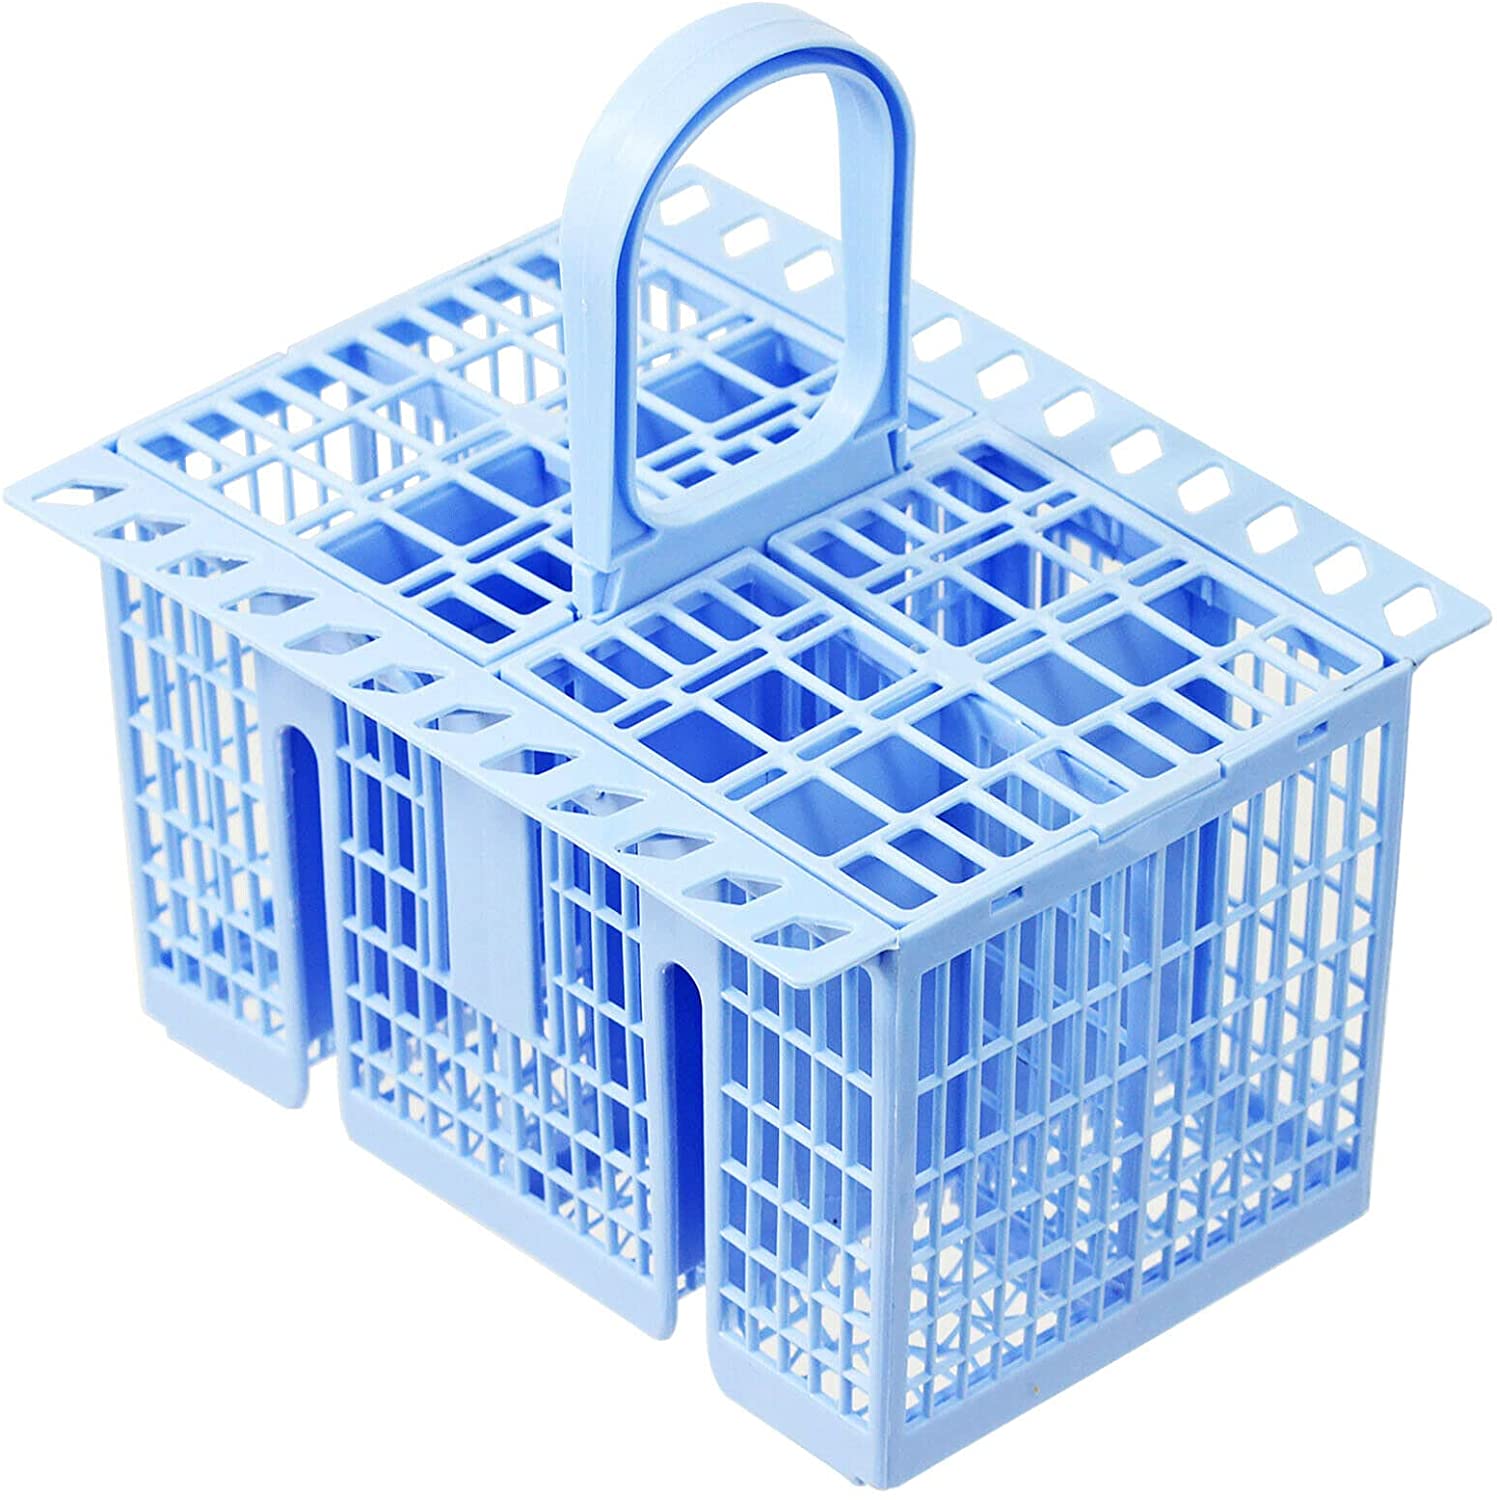 SPARES2GO Cutlery Basket compatible with IKEA Dishwasher (Blue, 220 x 208 x 160mm)